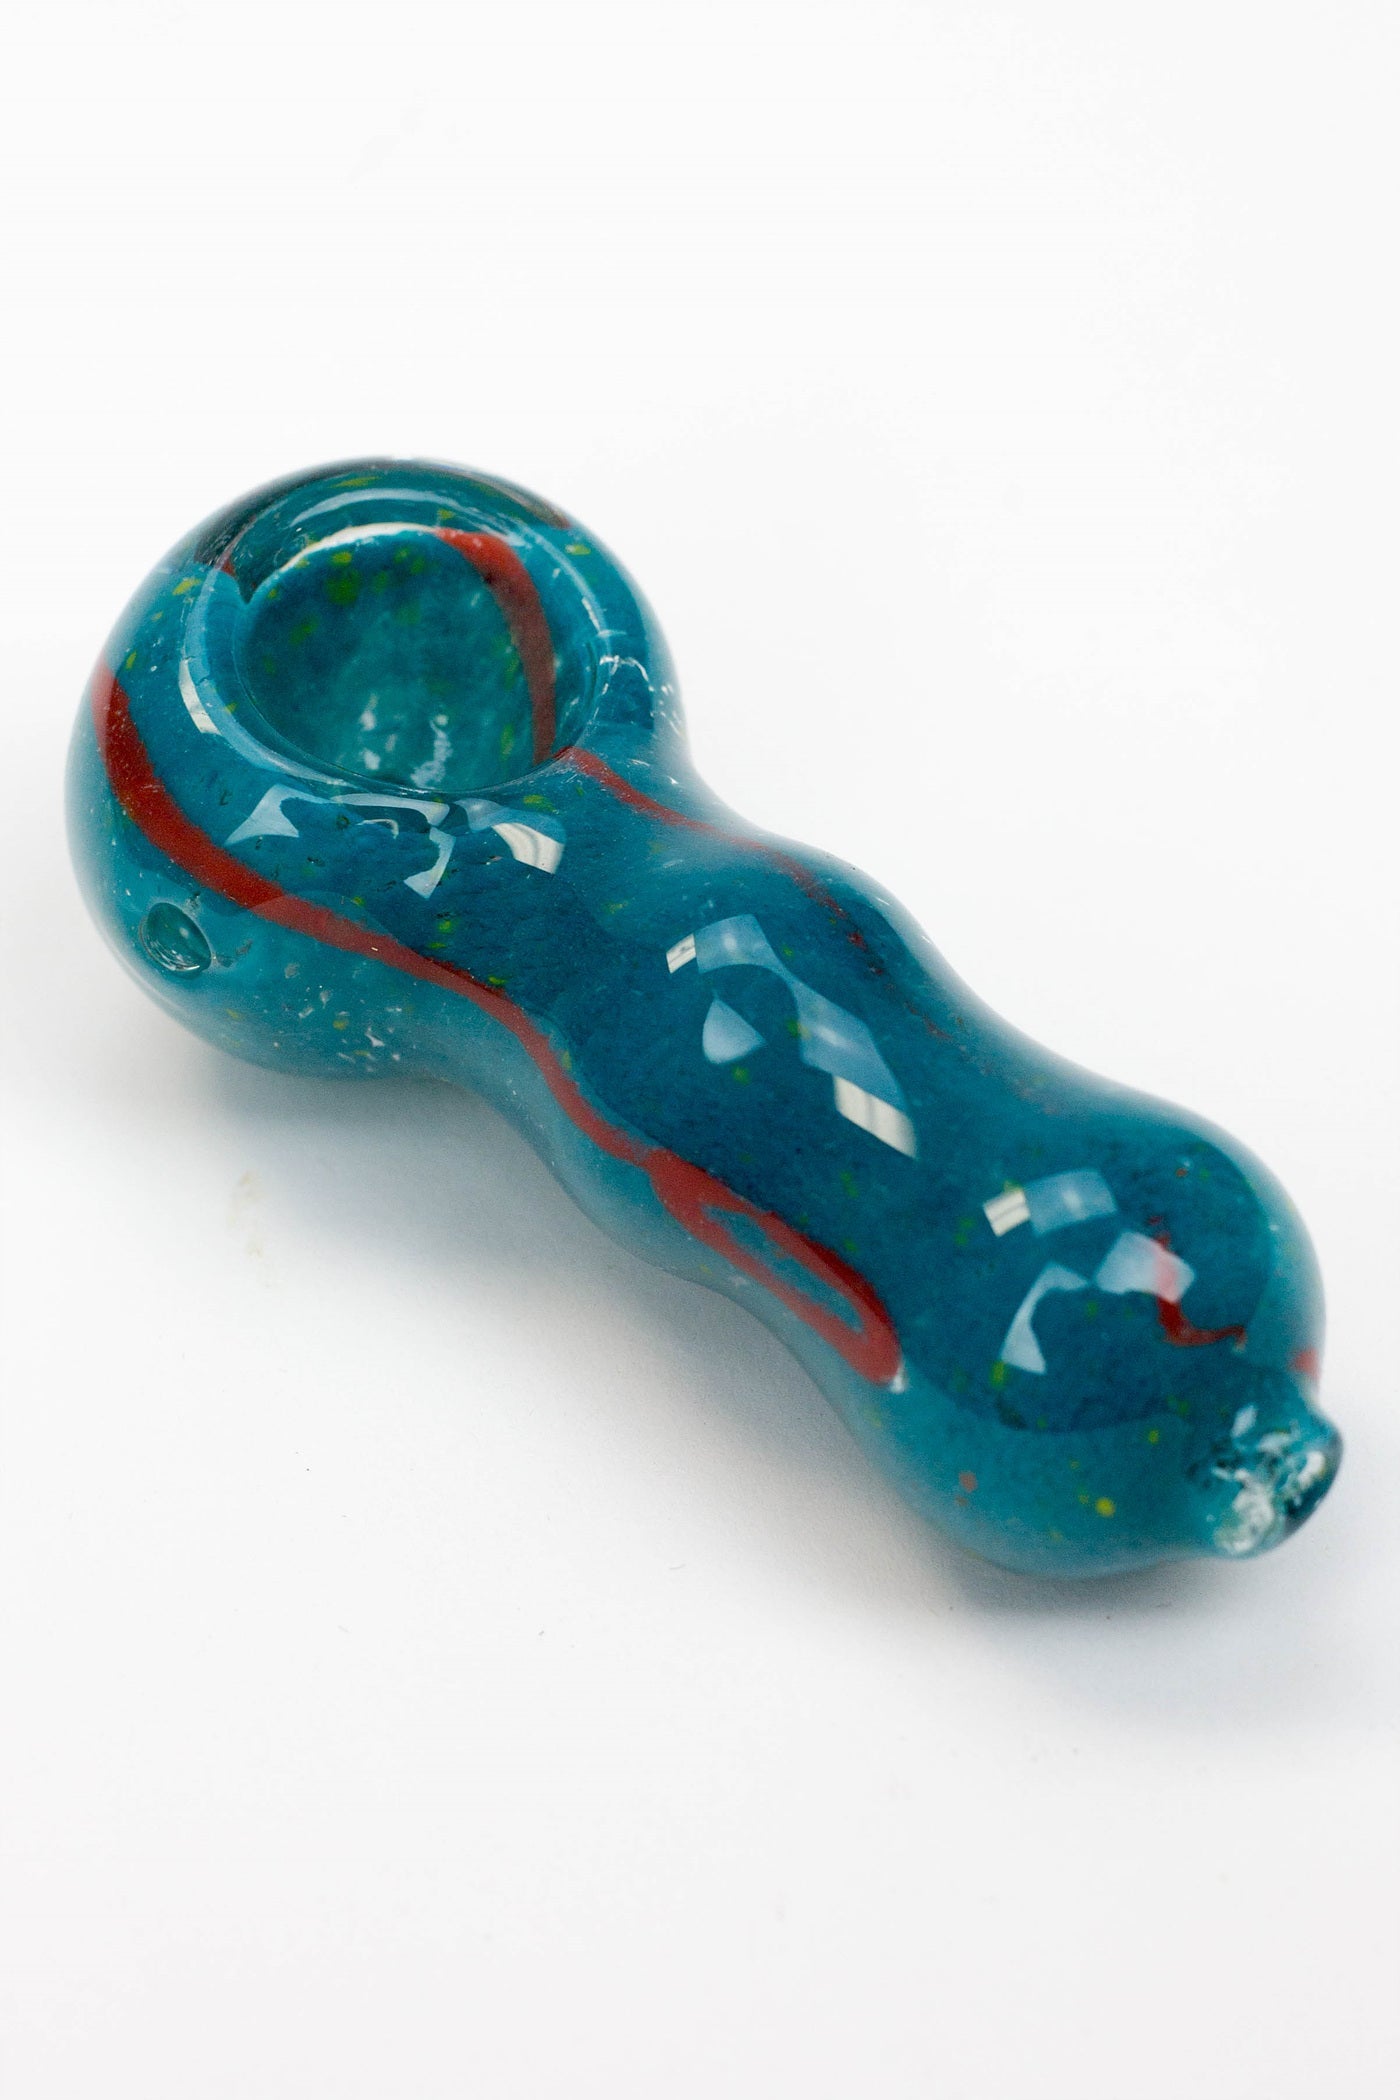 3" Soft glass 8550 hand pipe_3